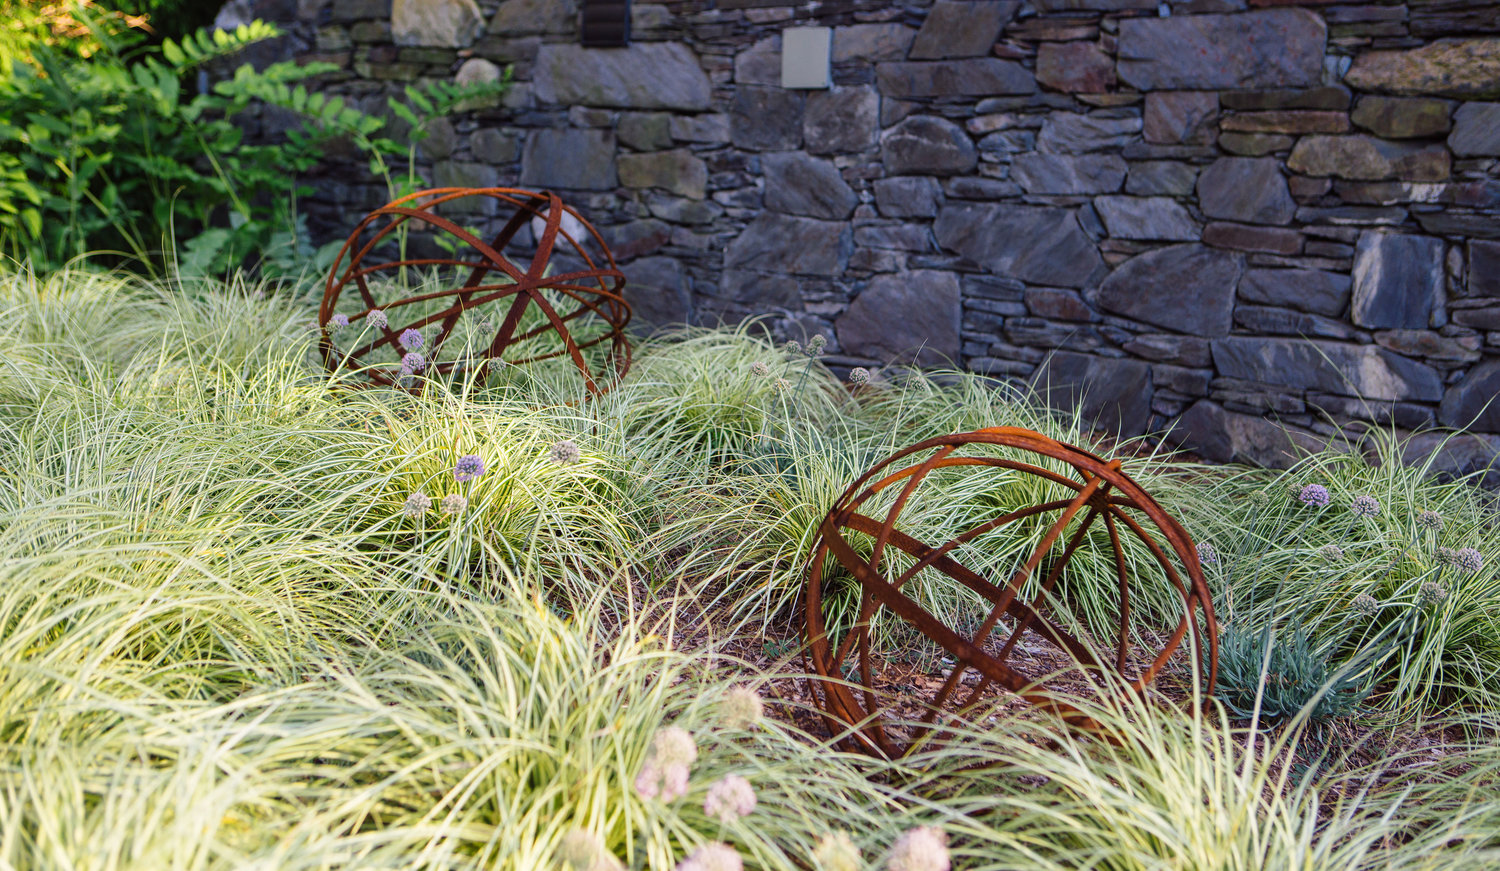 This small garden sits halfway up one of the flights of stairs, at a landing where a visitor sort of pauses on their way up. “I really felt it would be great to do something here,” Brook said. She found these metal sculptures and nested them amid an array of sedges and allium, creating an alluring little space. As seen throughout the property, it has that natural, wispy, relaxed feel about it.